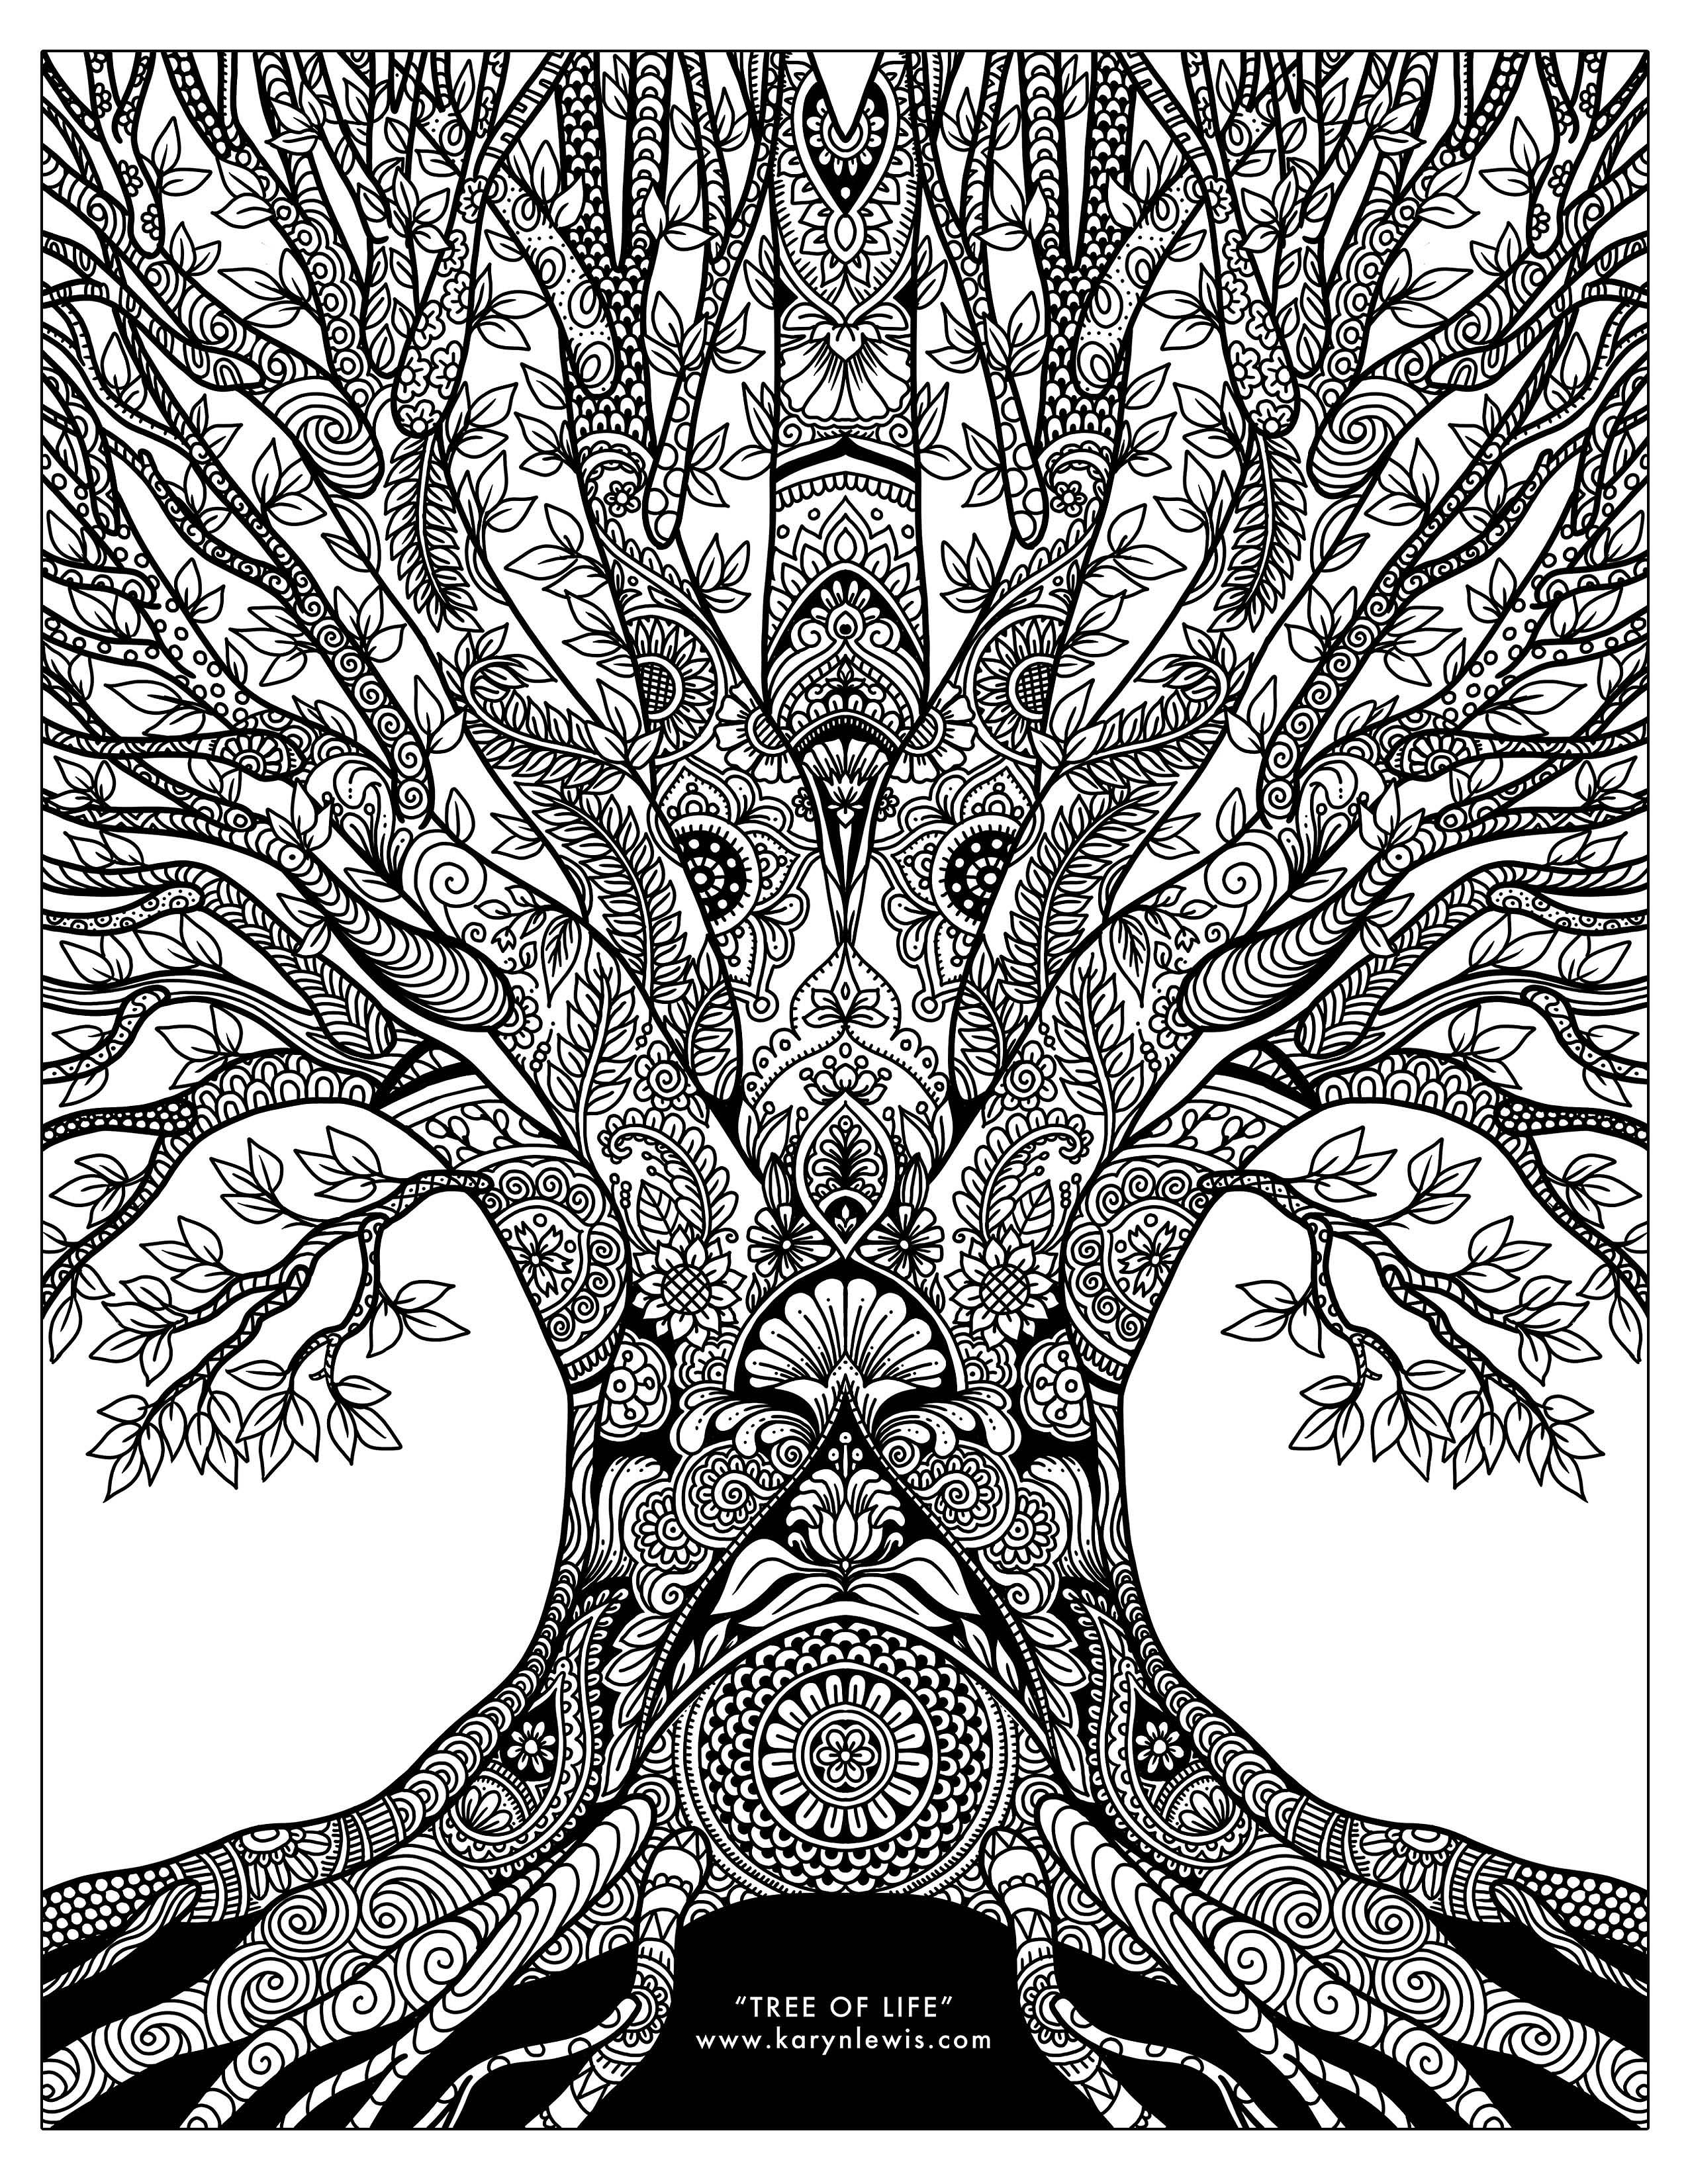 quotTree of Lifequot Doodle Art Free Adult Coloring Page Karyn